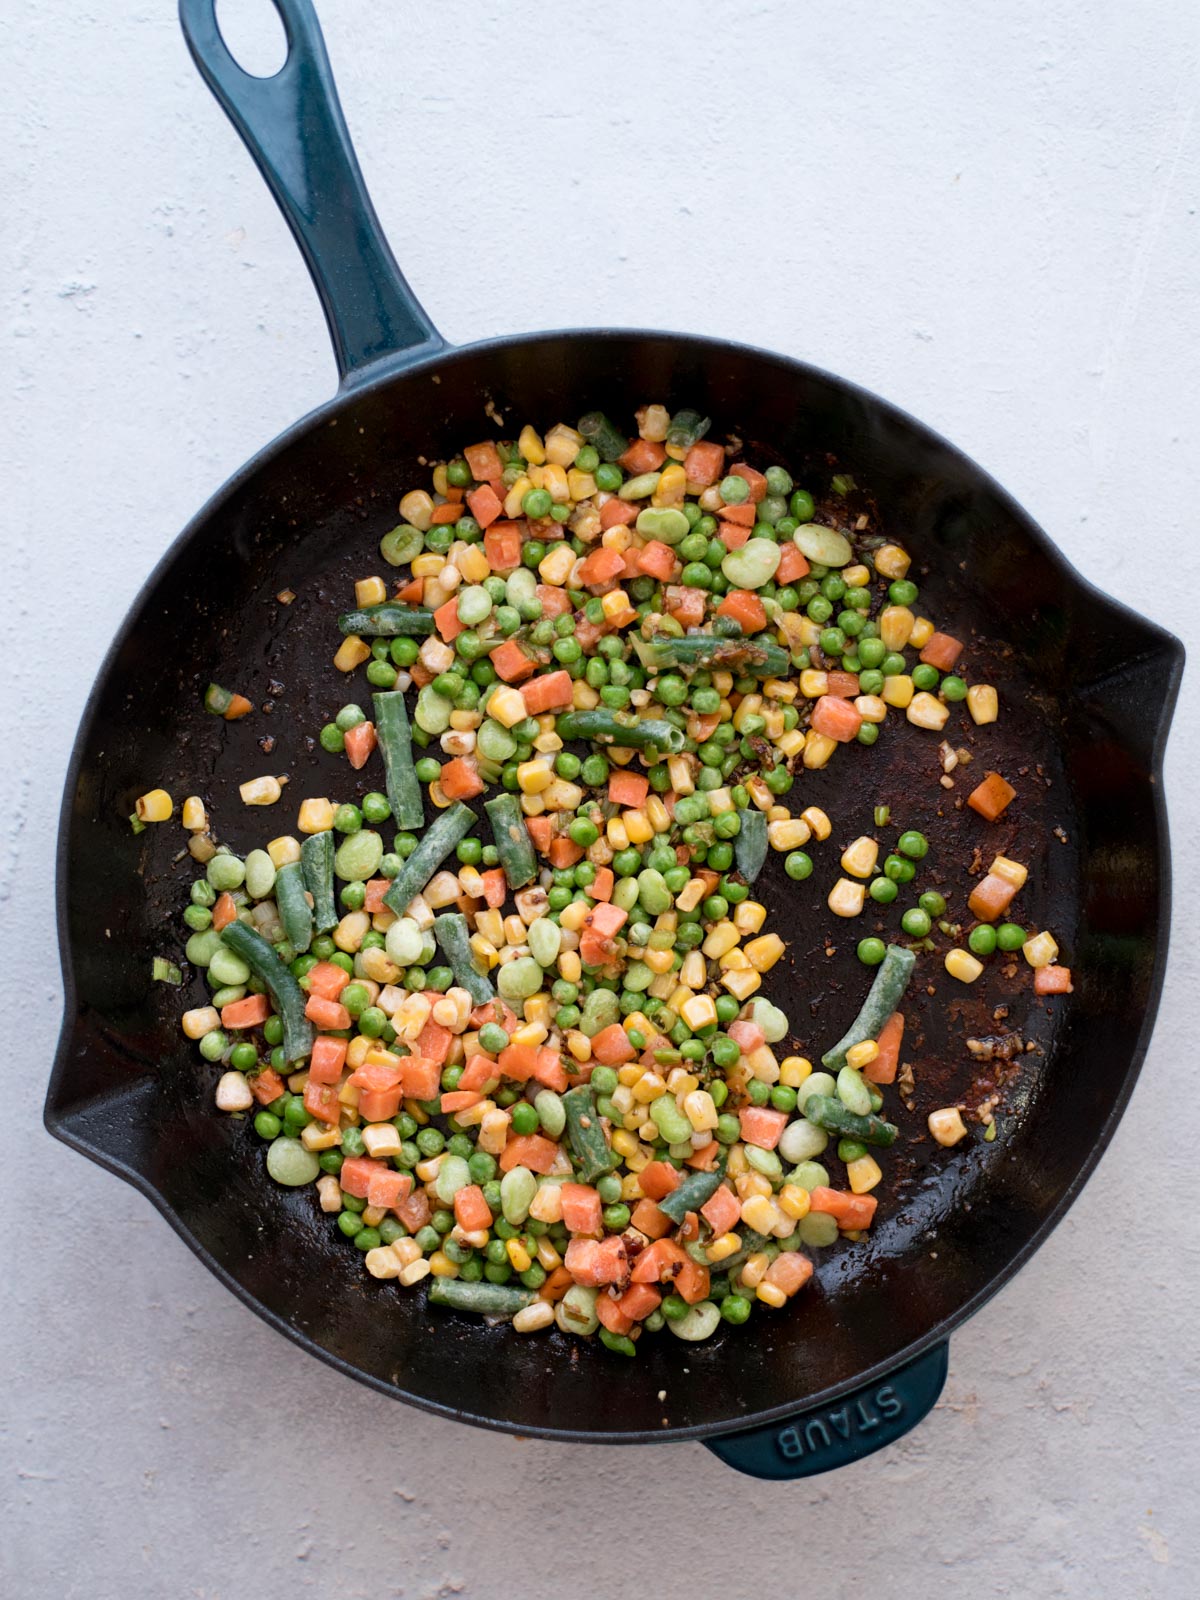 vegetables, garlic, and green onions sautéing in a skillet